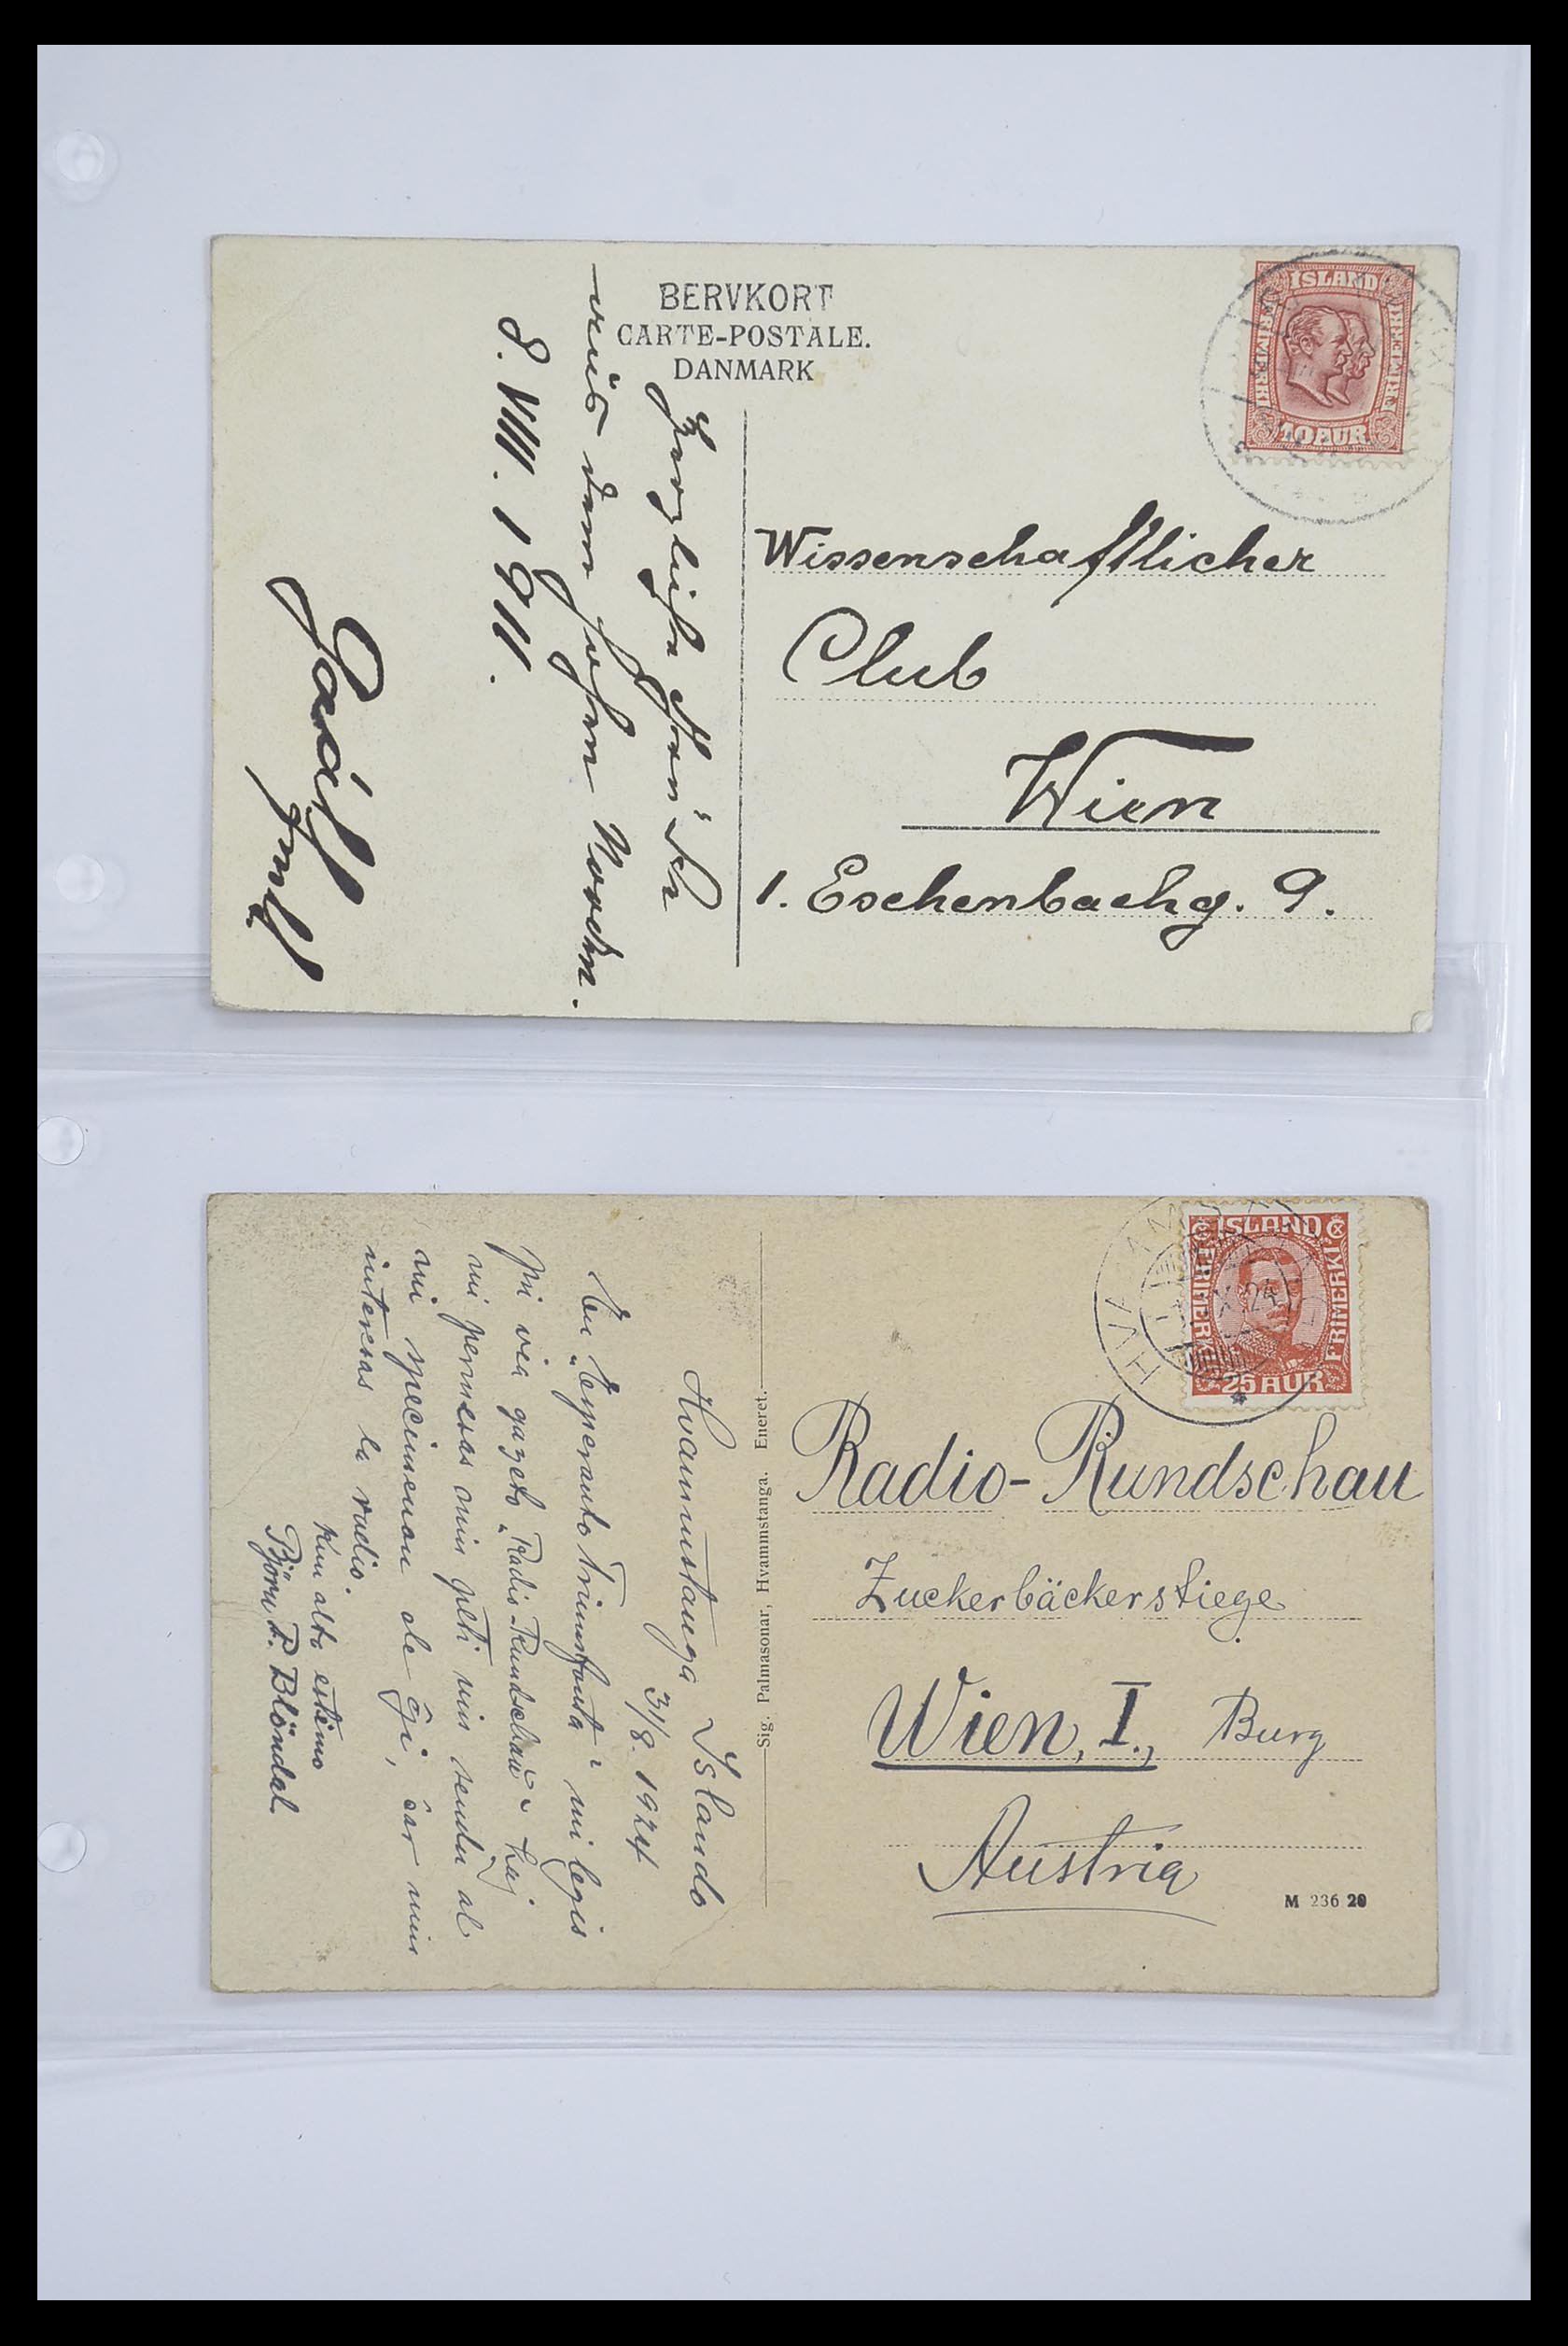 33241 051 - Stamp collection 33241 Scandinavia covers 1860-1930.